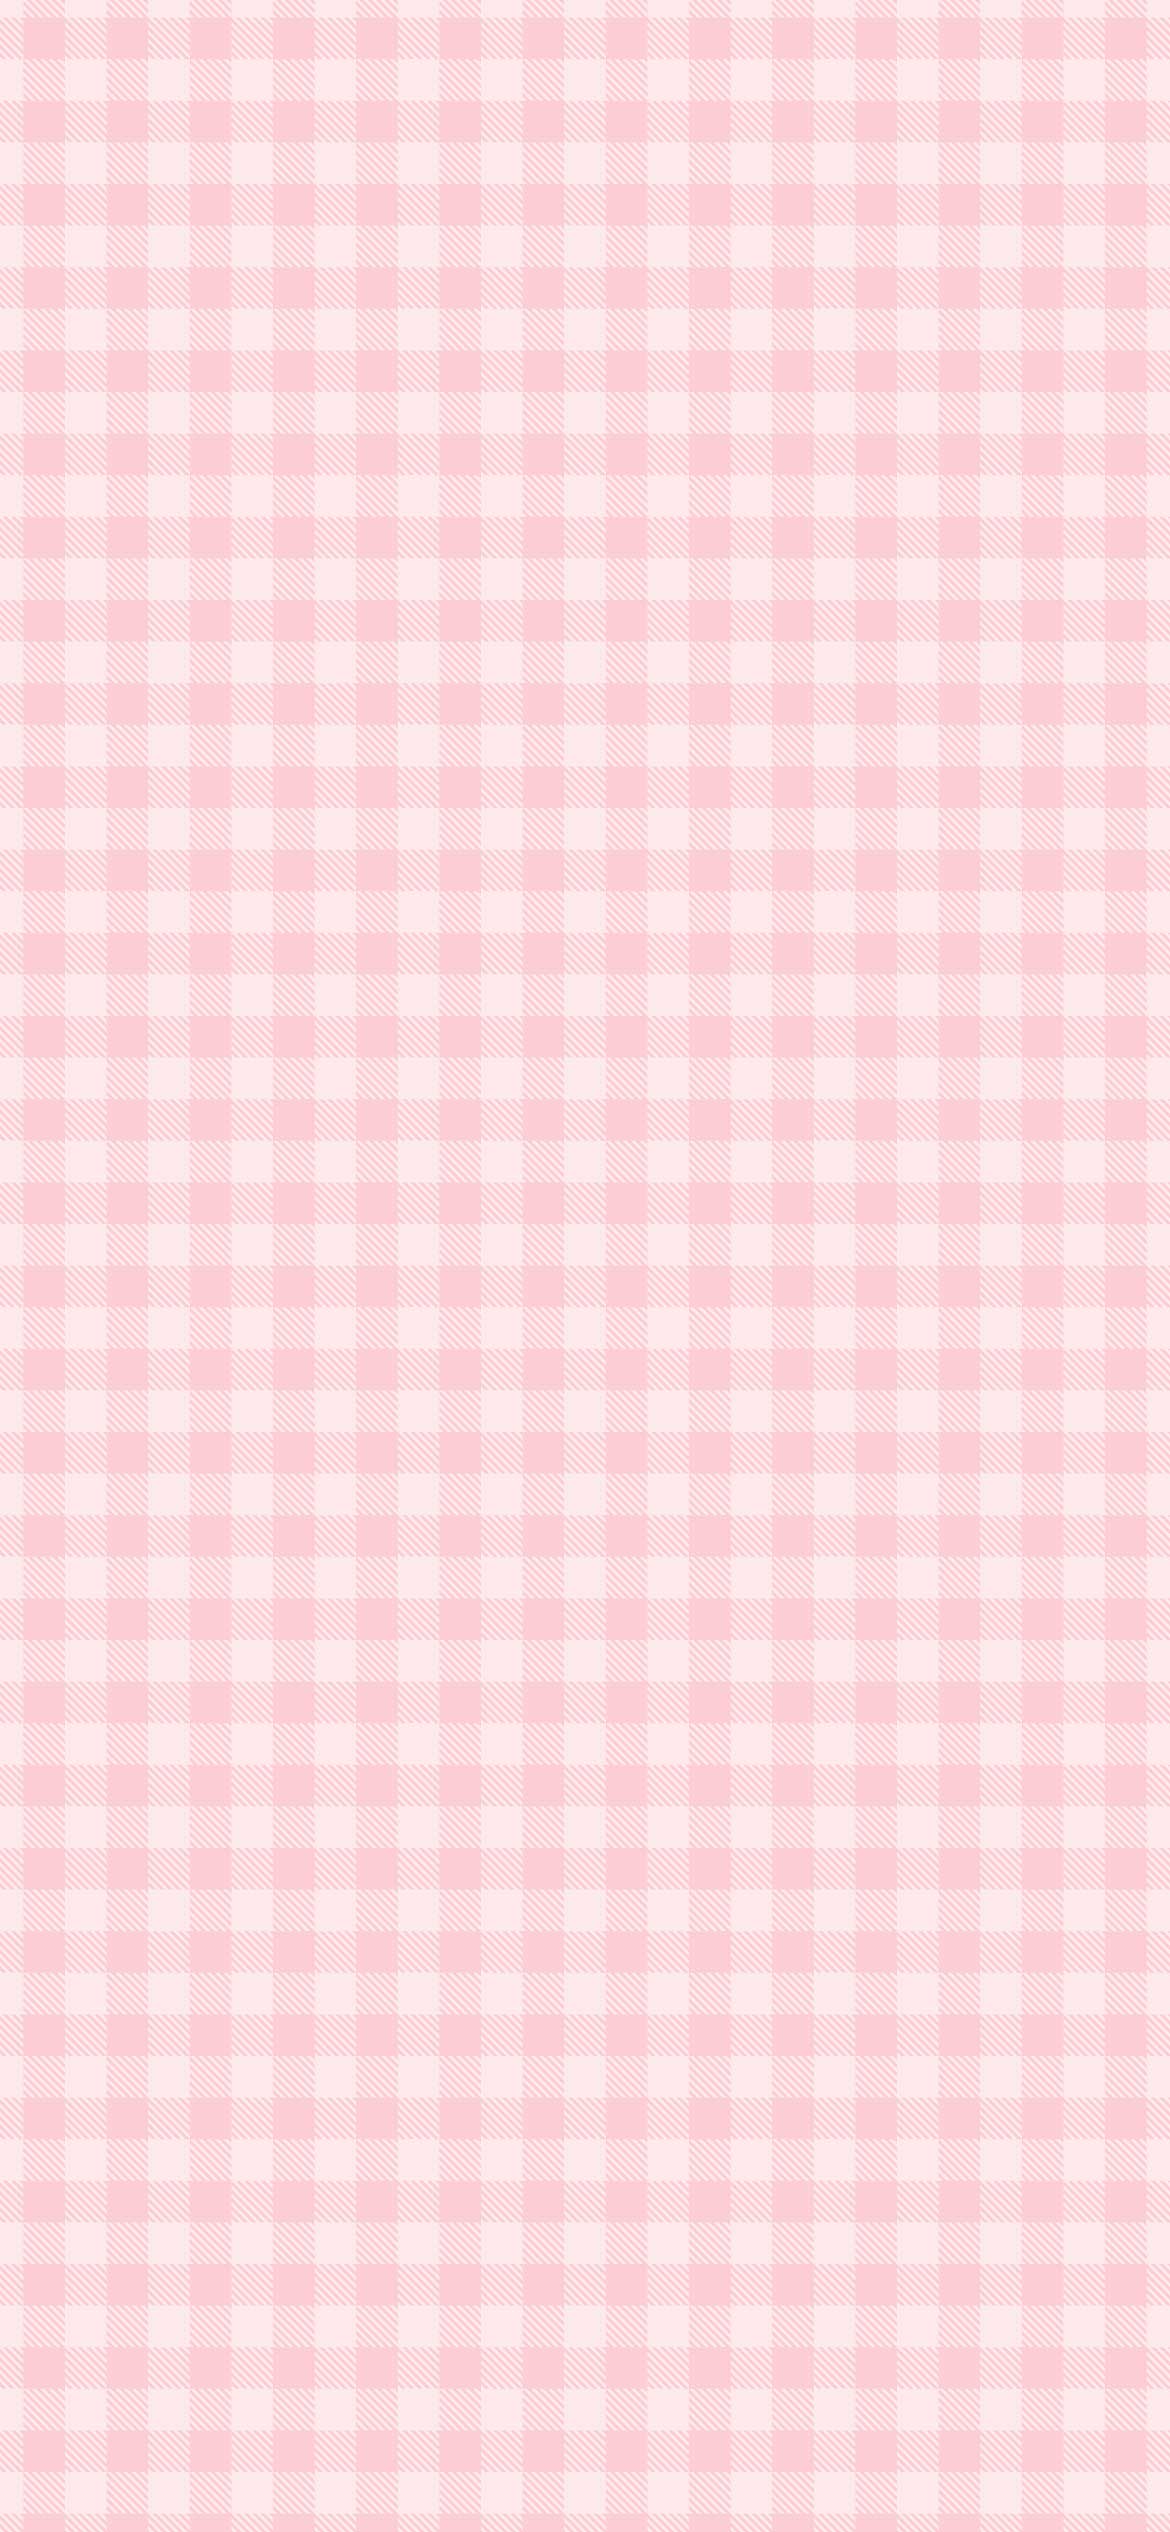 Pink Aesthetic Picture : Light Pink Plaid Wallpaper